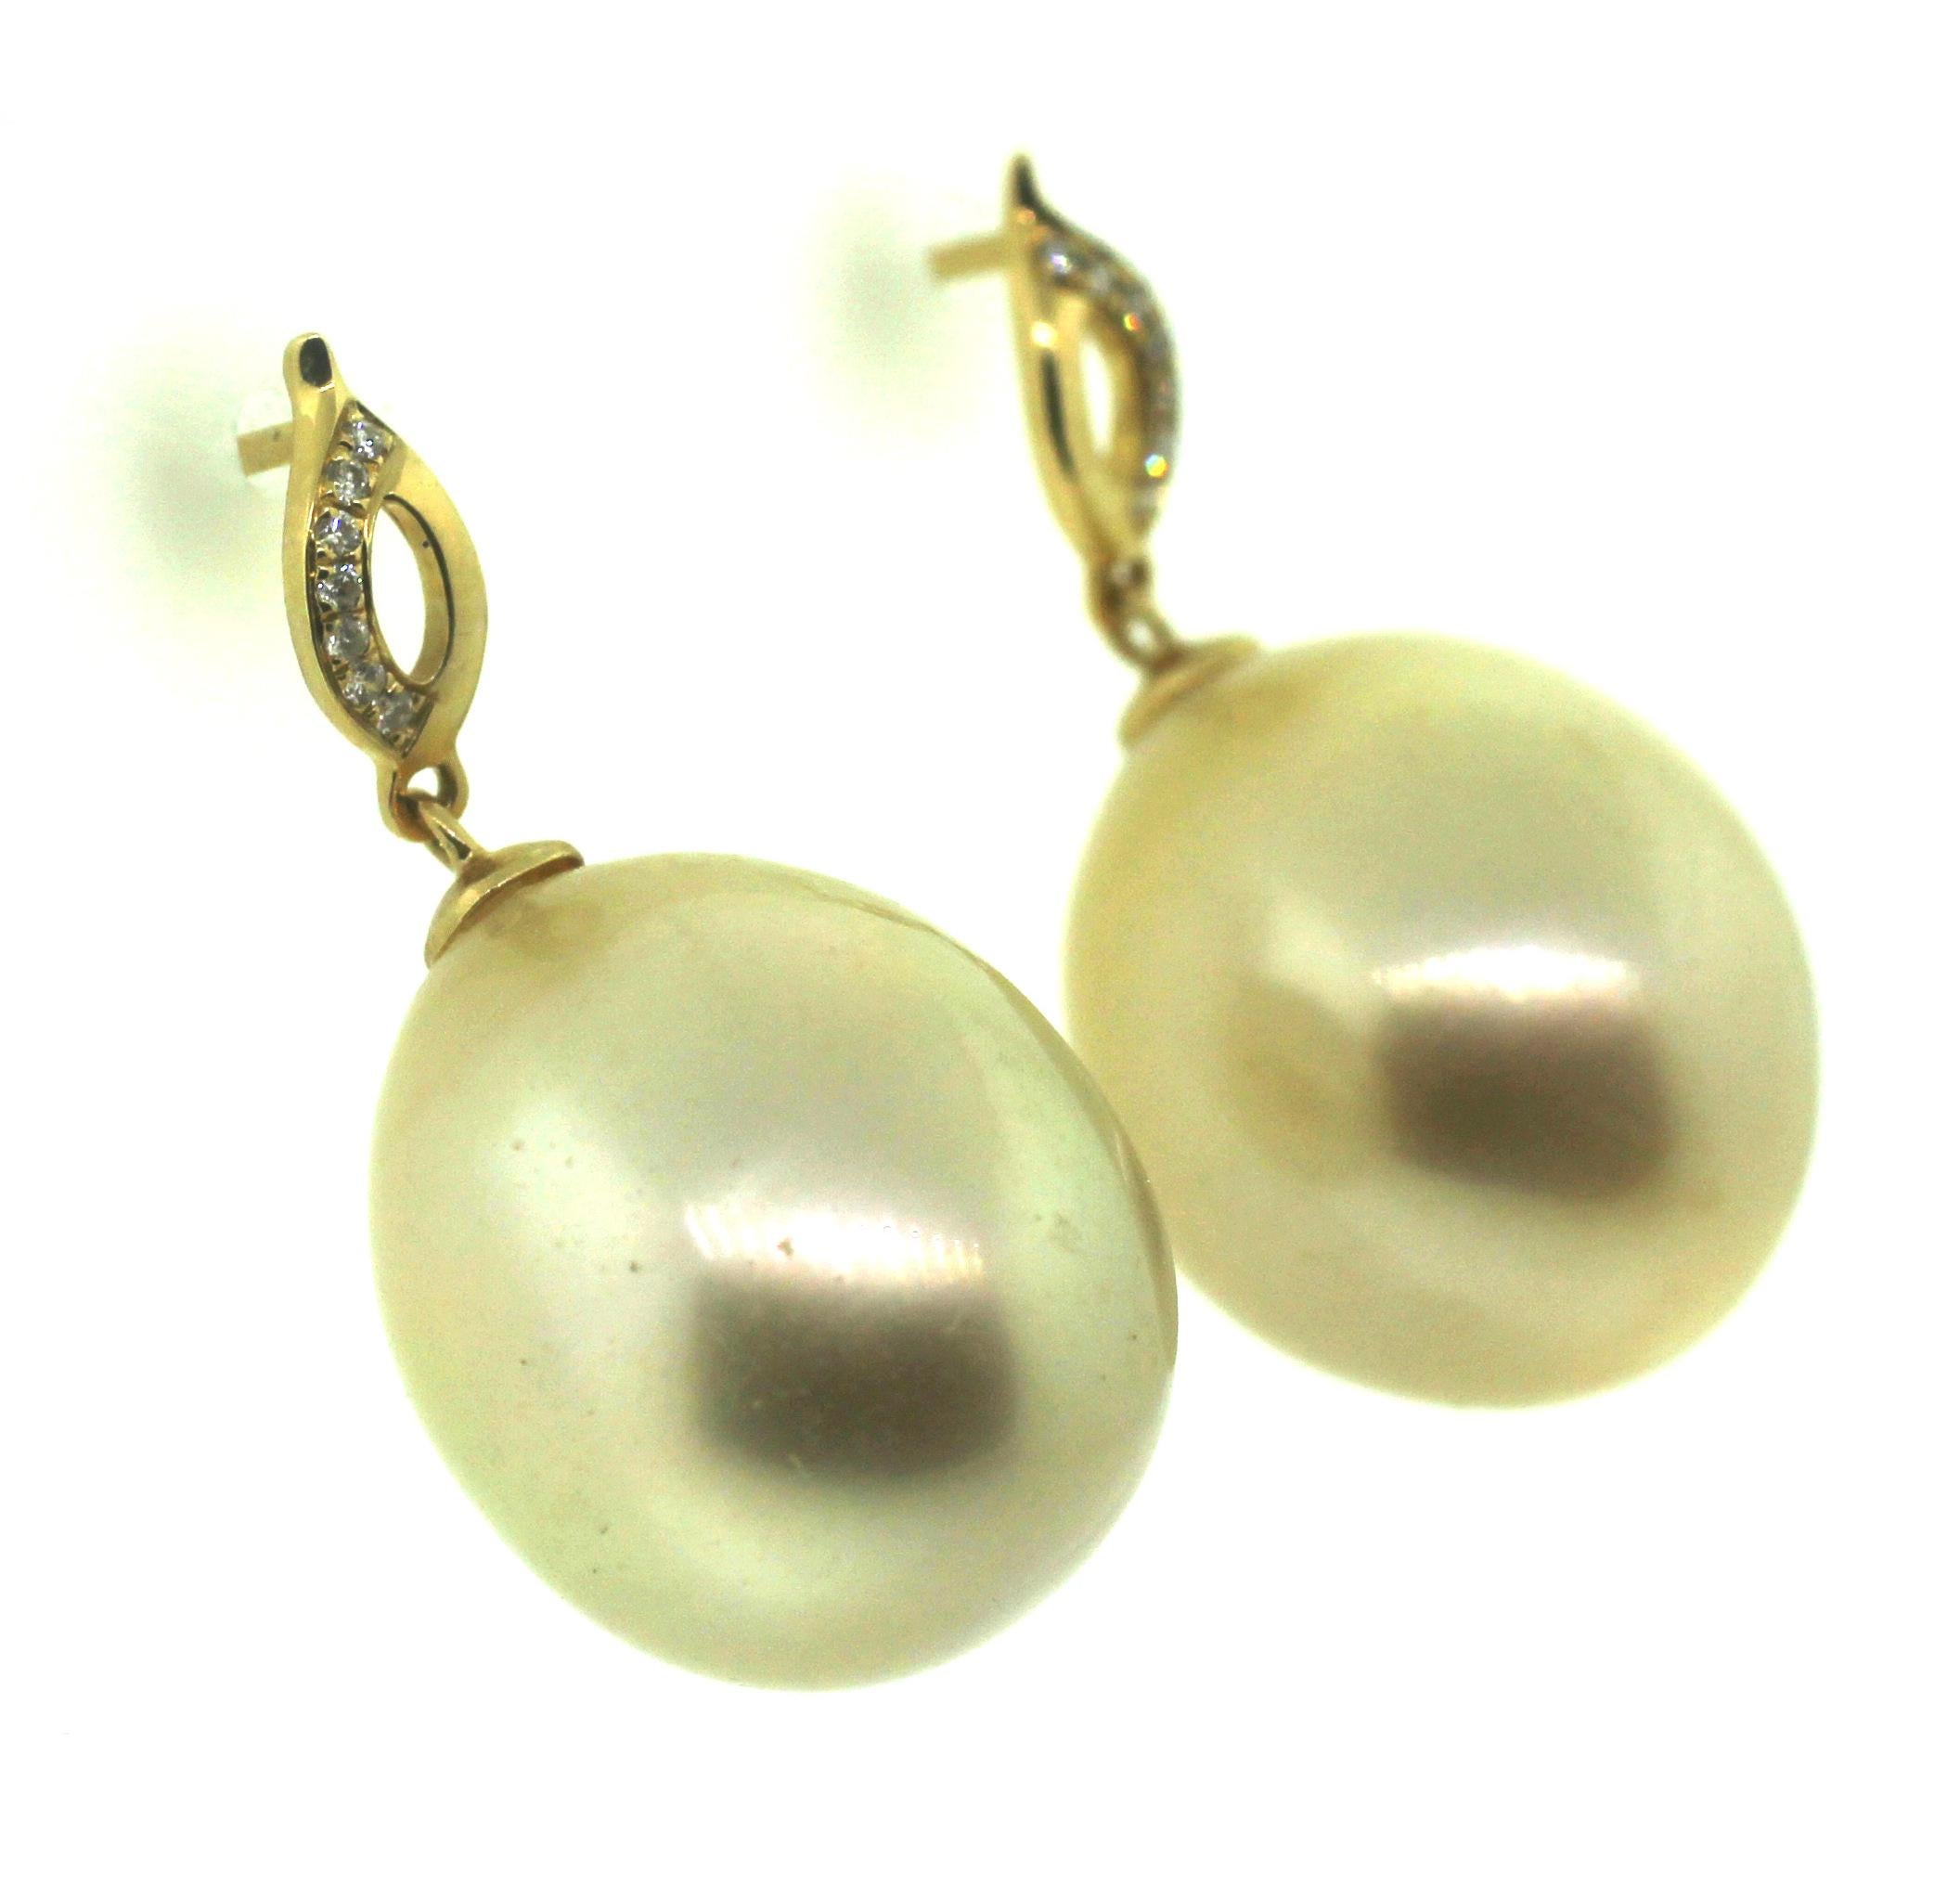 Hakimoto By Jewel Of Ocean
18K White Gold and Diamond 
Natural Color South Sea Drop Pearl Earrings
Total item weight 8 grams
Featuring 0.03 Carats of Round Brilliant Diamonds
15-13mm South Sea Drop Cultured Pearls
18K Yellow Gold High Polish
Orient: